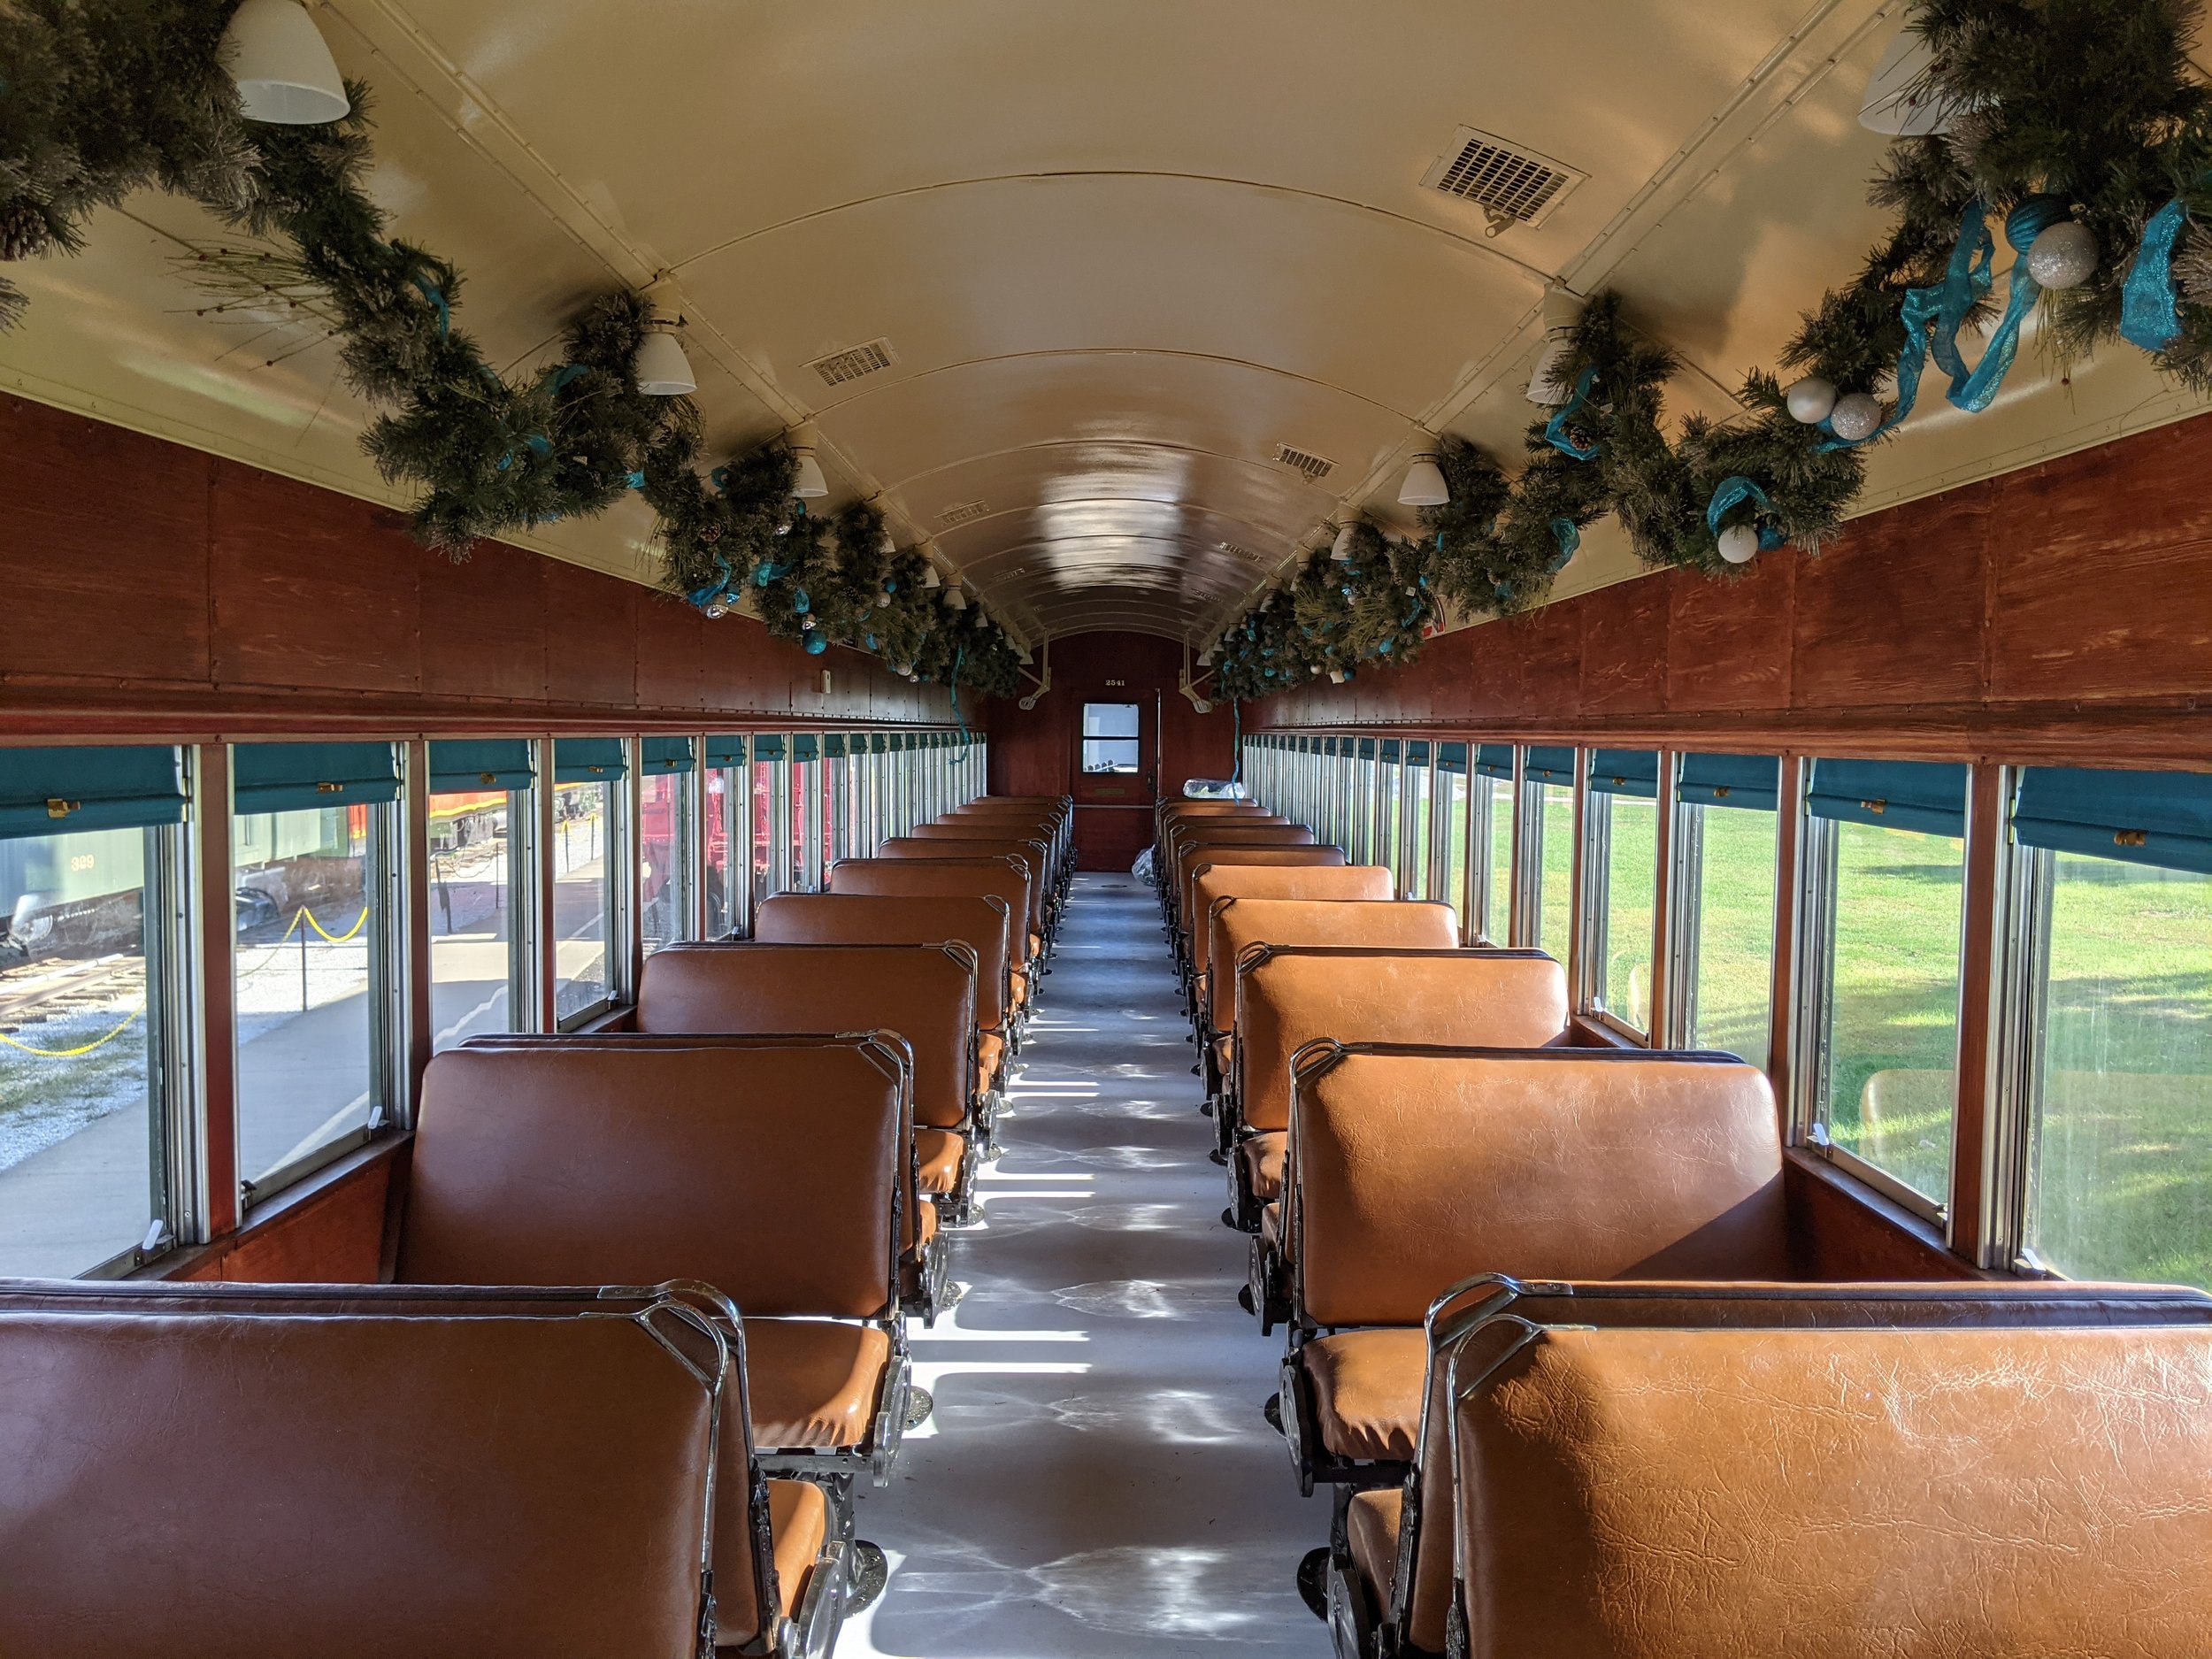  The restoration was complete in advance of Polar Express and museum volunteers have begun installing decorations.  